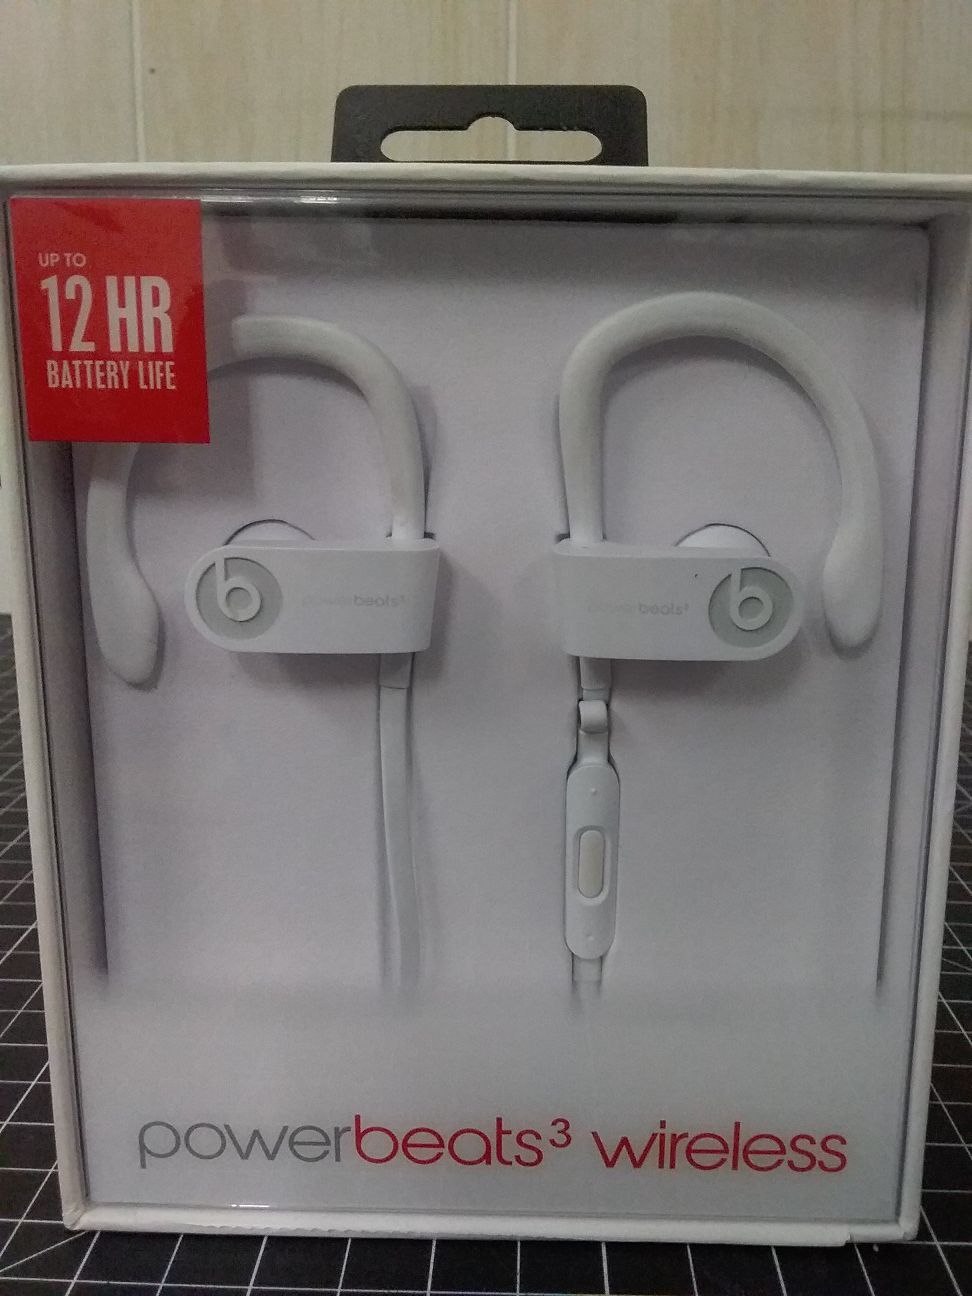 Apple ML8W2LL/A Powerbeats 3 wireless bluetooth earphones headphones earbuds with USB charging cord, & carry case, all in box 96091426429